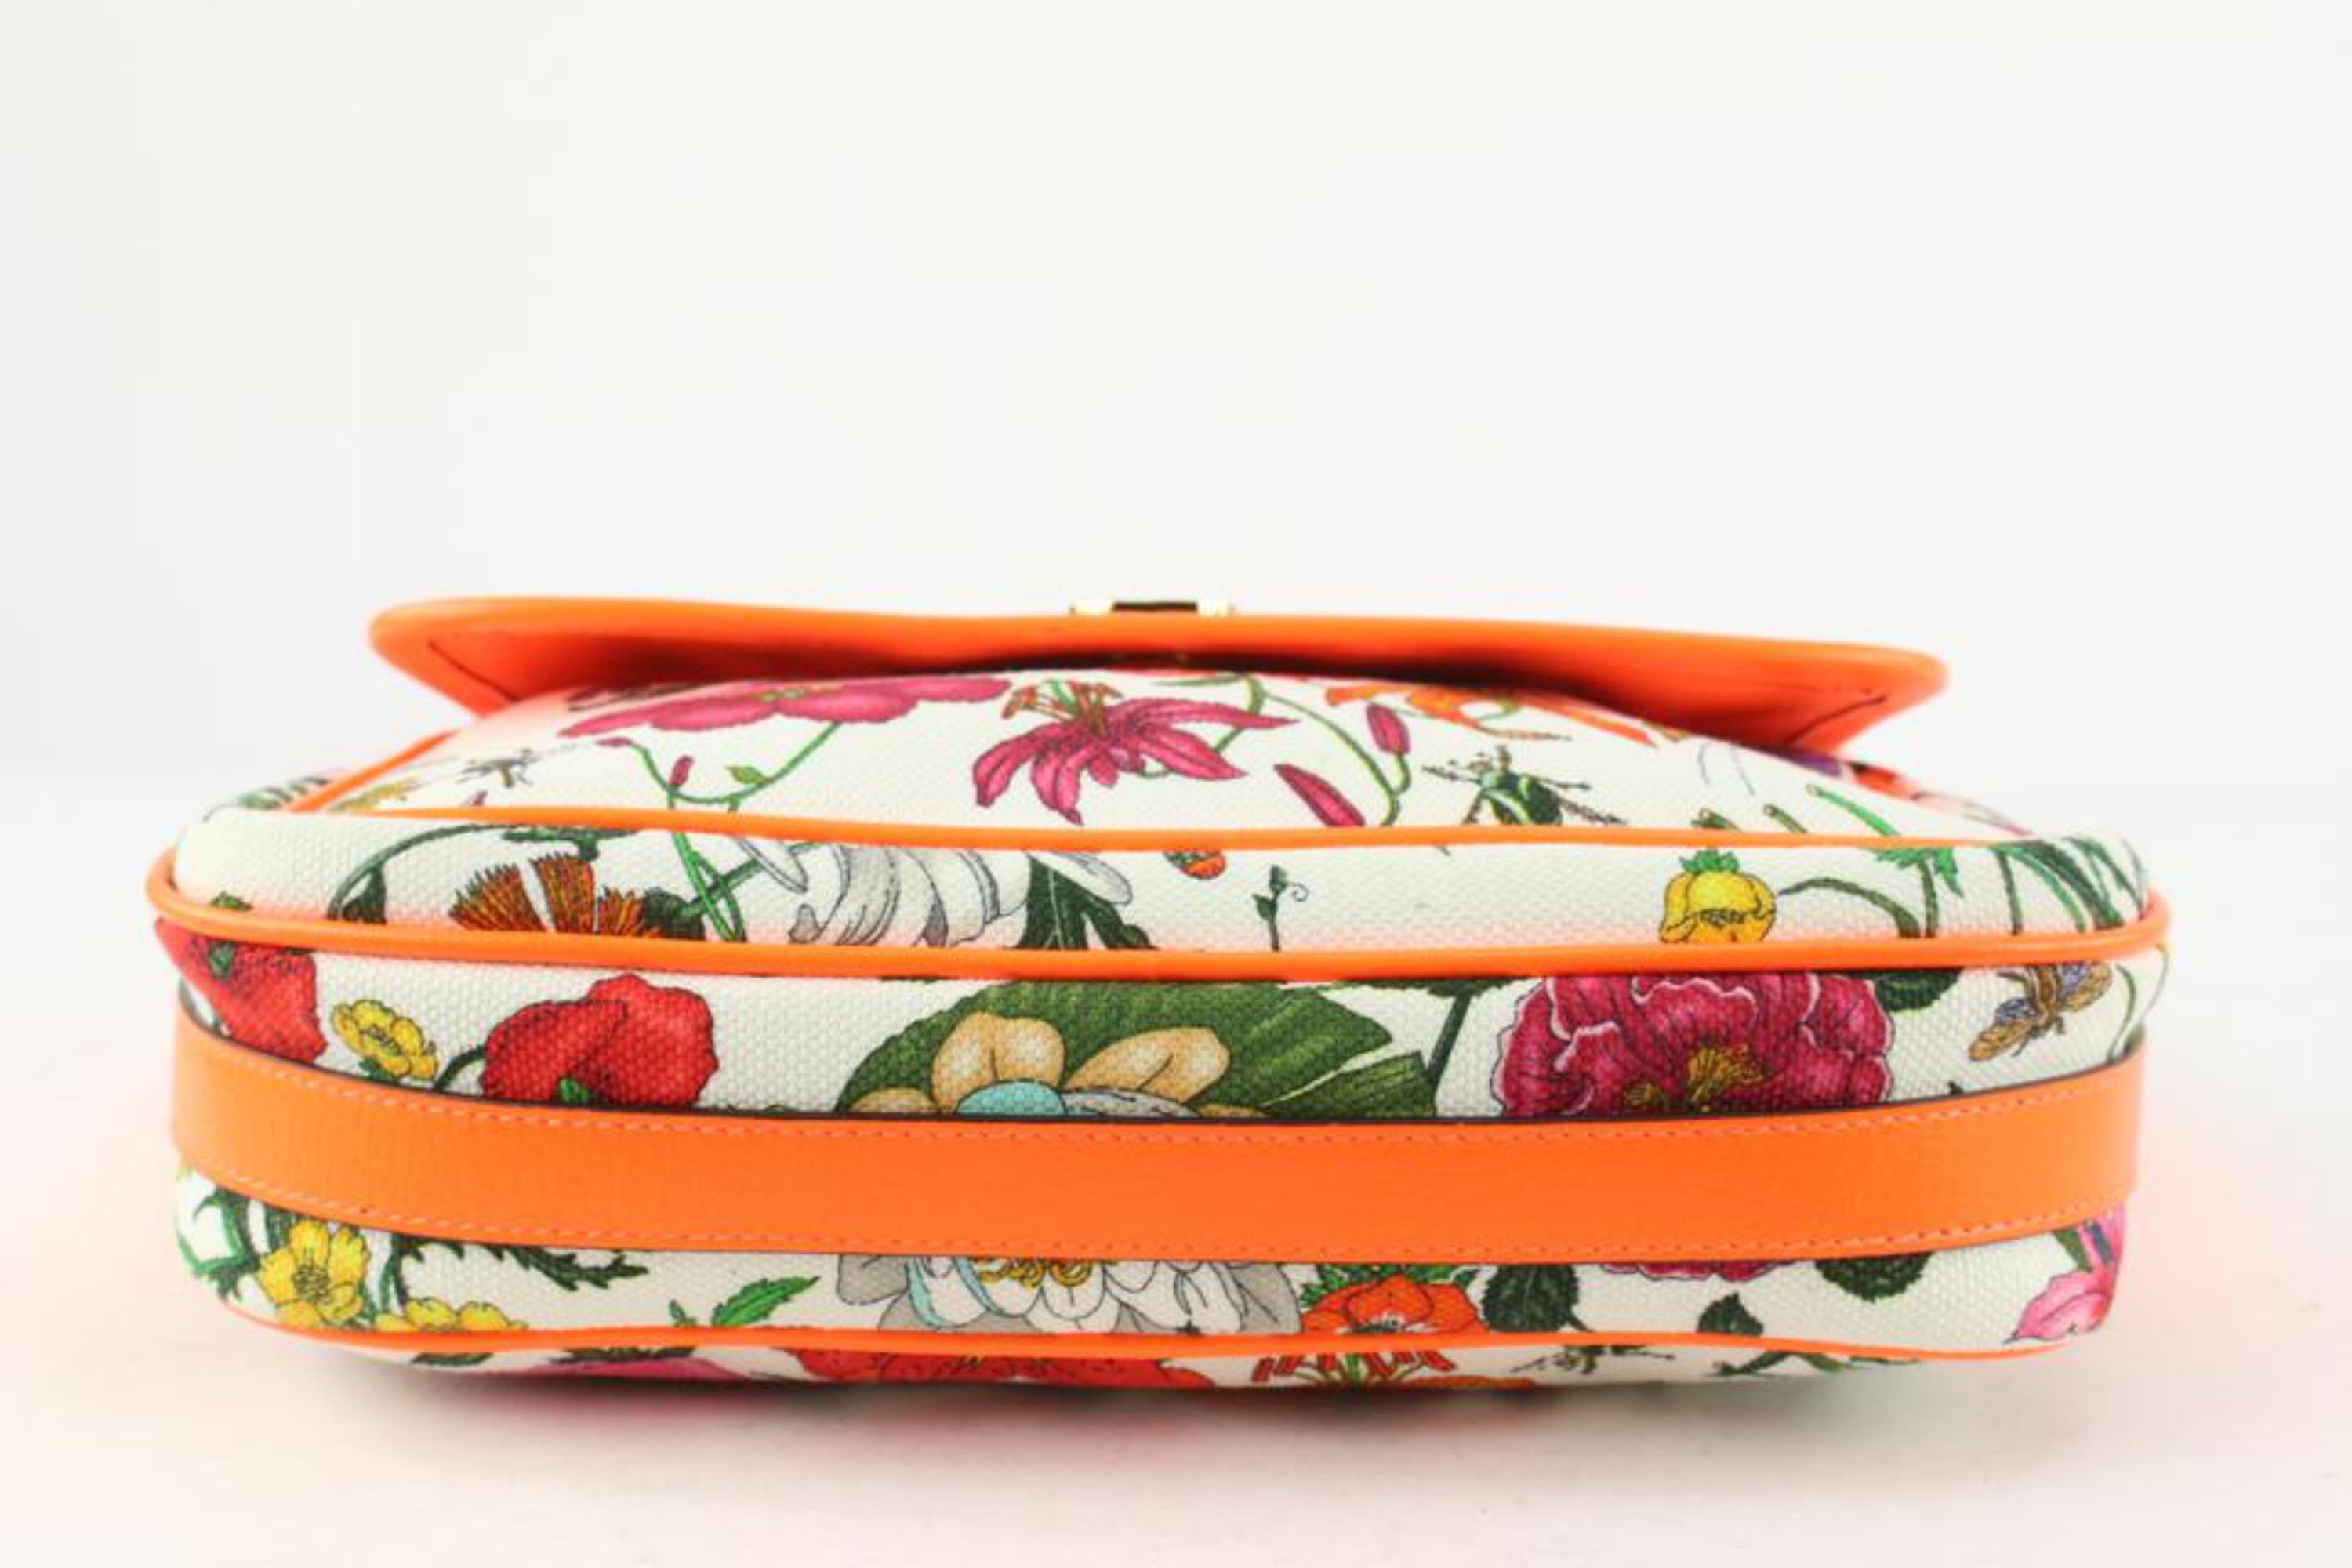 Gucci Neon Orange White Flora Floral Crossbody Bag 1118g26 In Excellent Condition In Dix hills, NY